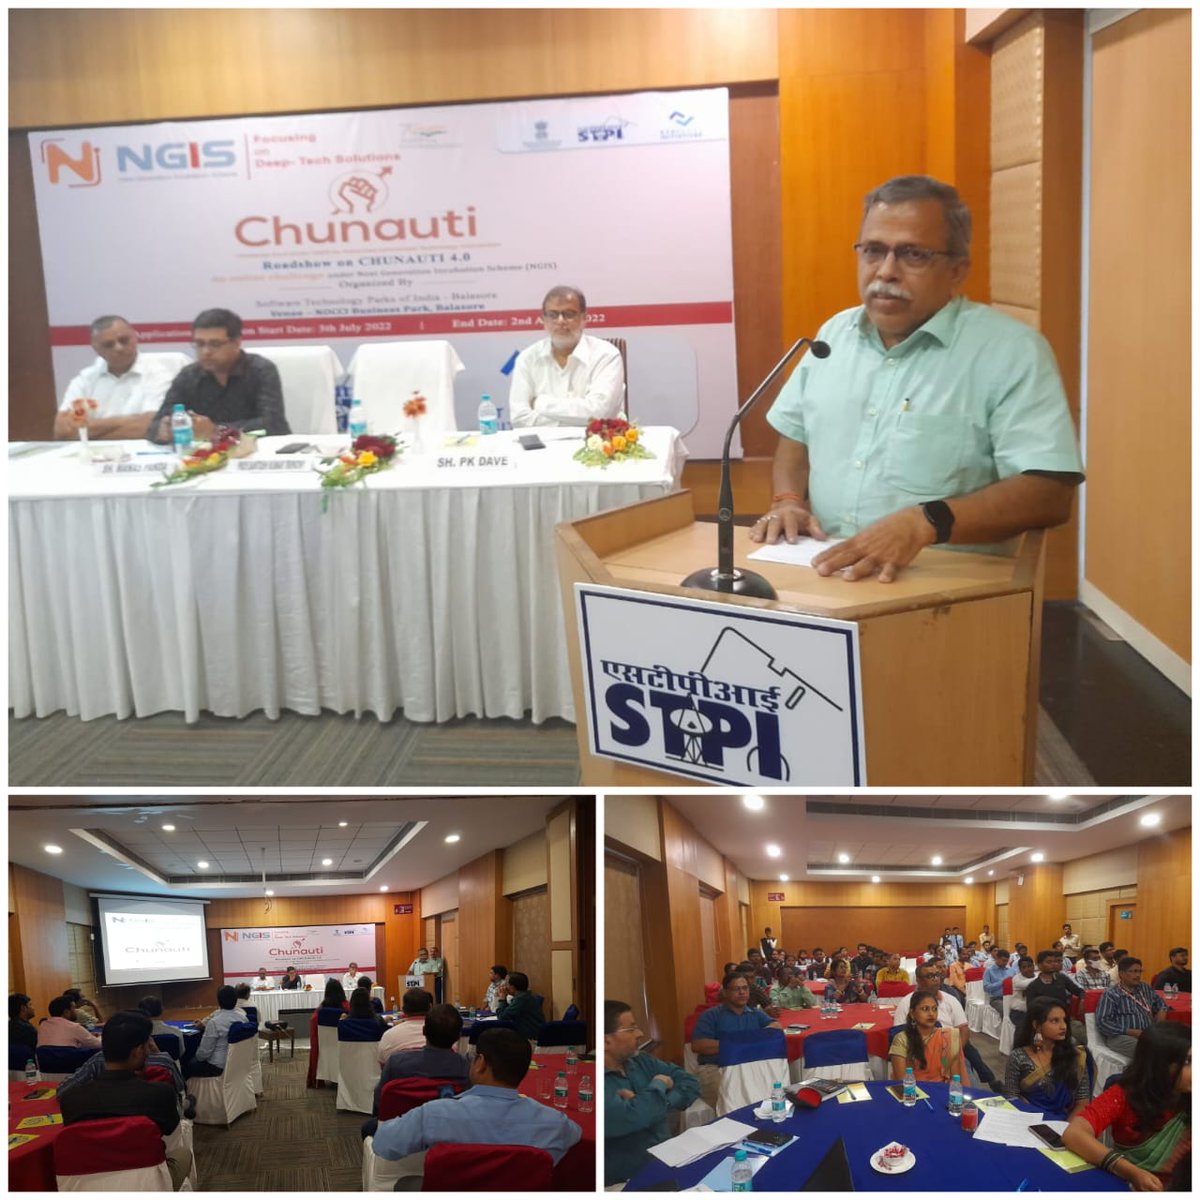 Lauding the initiatives of @Stpiindia,Vice Chancellor, FM University, Balasore stated that the collaborative ecosystem & offerings of #NGIS #CHUNAUTI will be a breeding ground for Entrepreneurship in the region @arvindtw @DeveshTyagii @manas_r_panda @stpinext @stpibbsr @GoI_MeitY